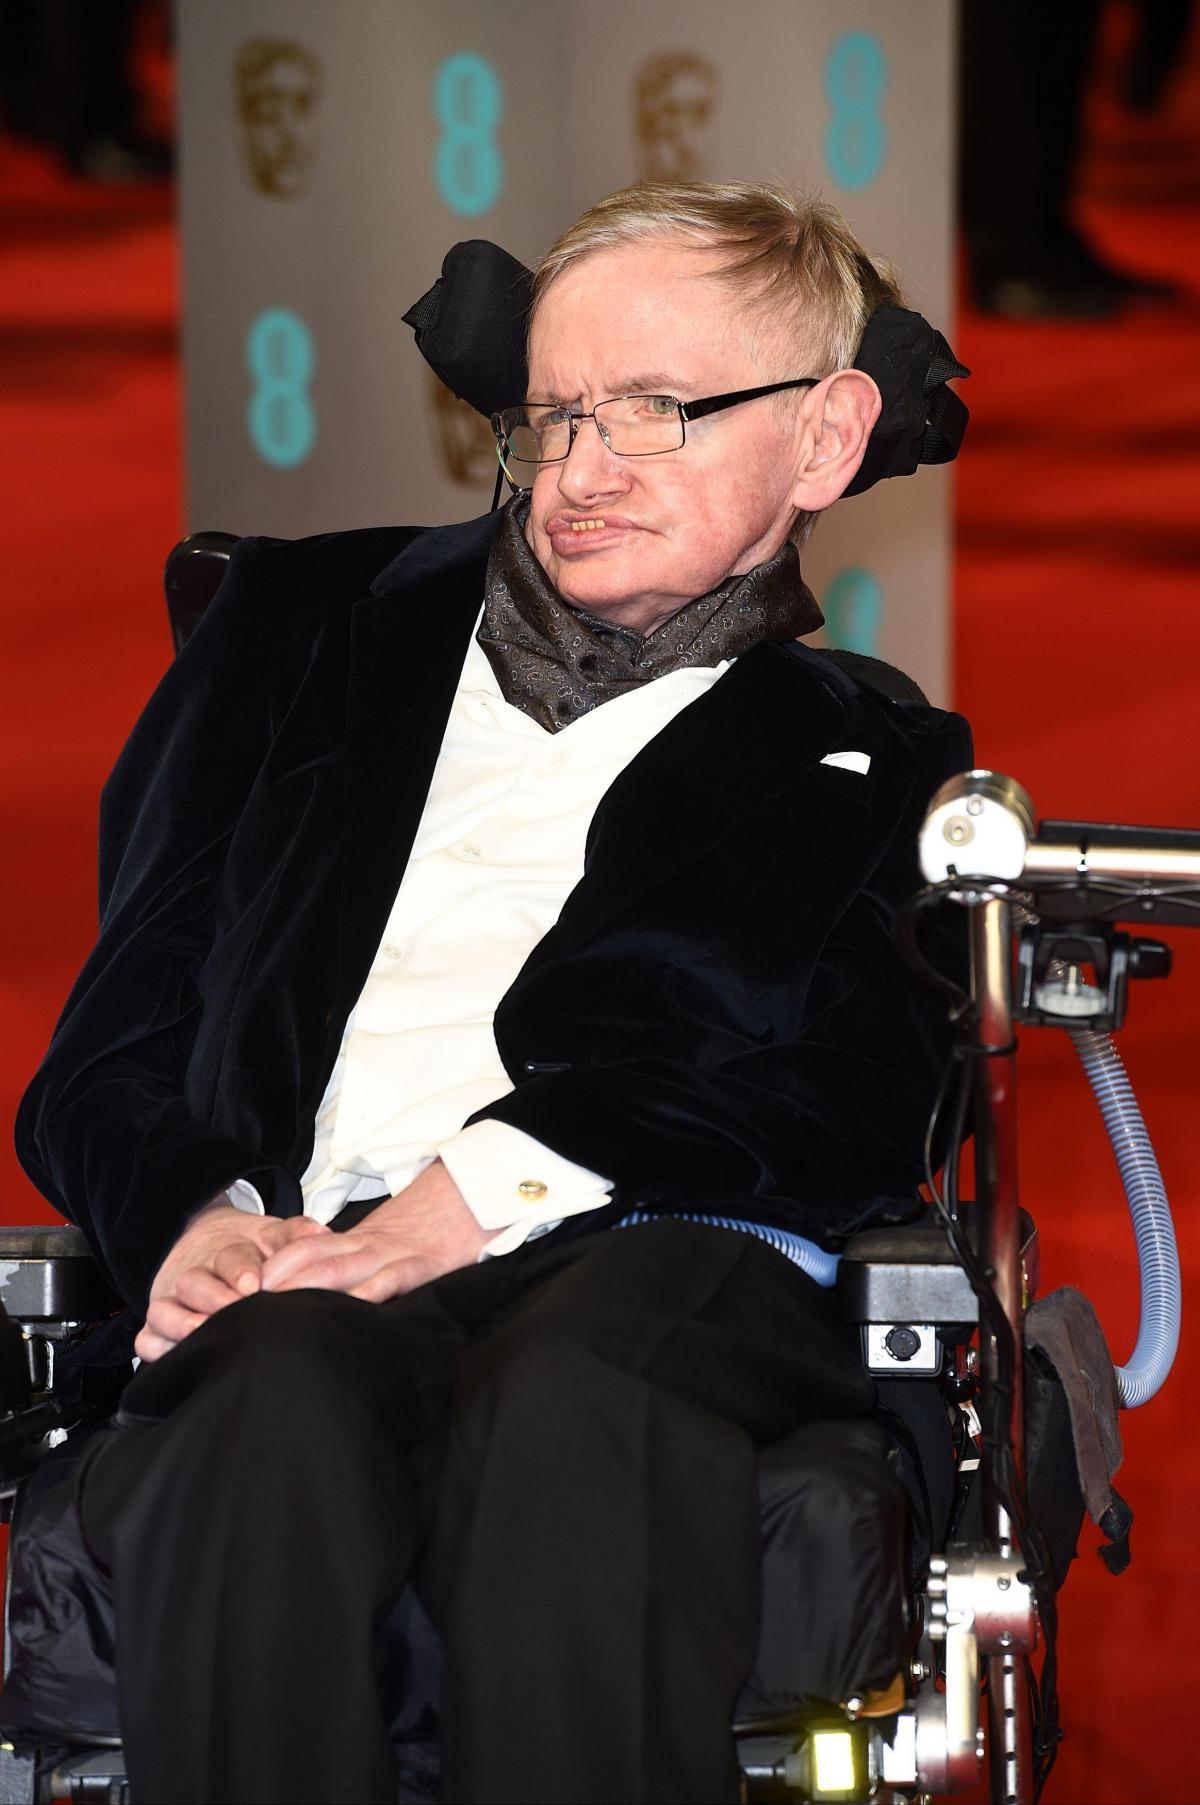 Professor Stephen Hawking: "I have always tried to overcome the limitations of my condition and lead as full a life as possible. I have travelled the world, from the antarctic to zero gravity".